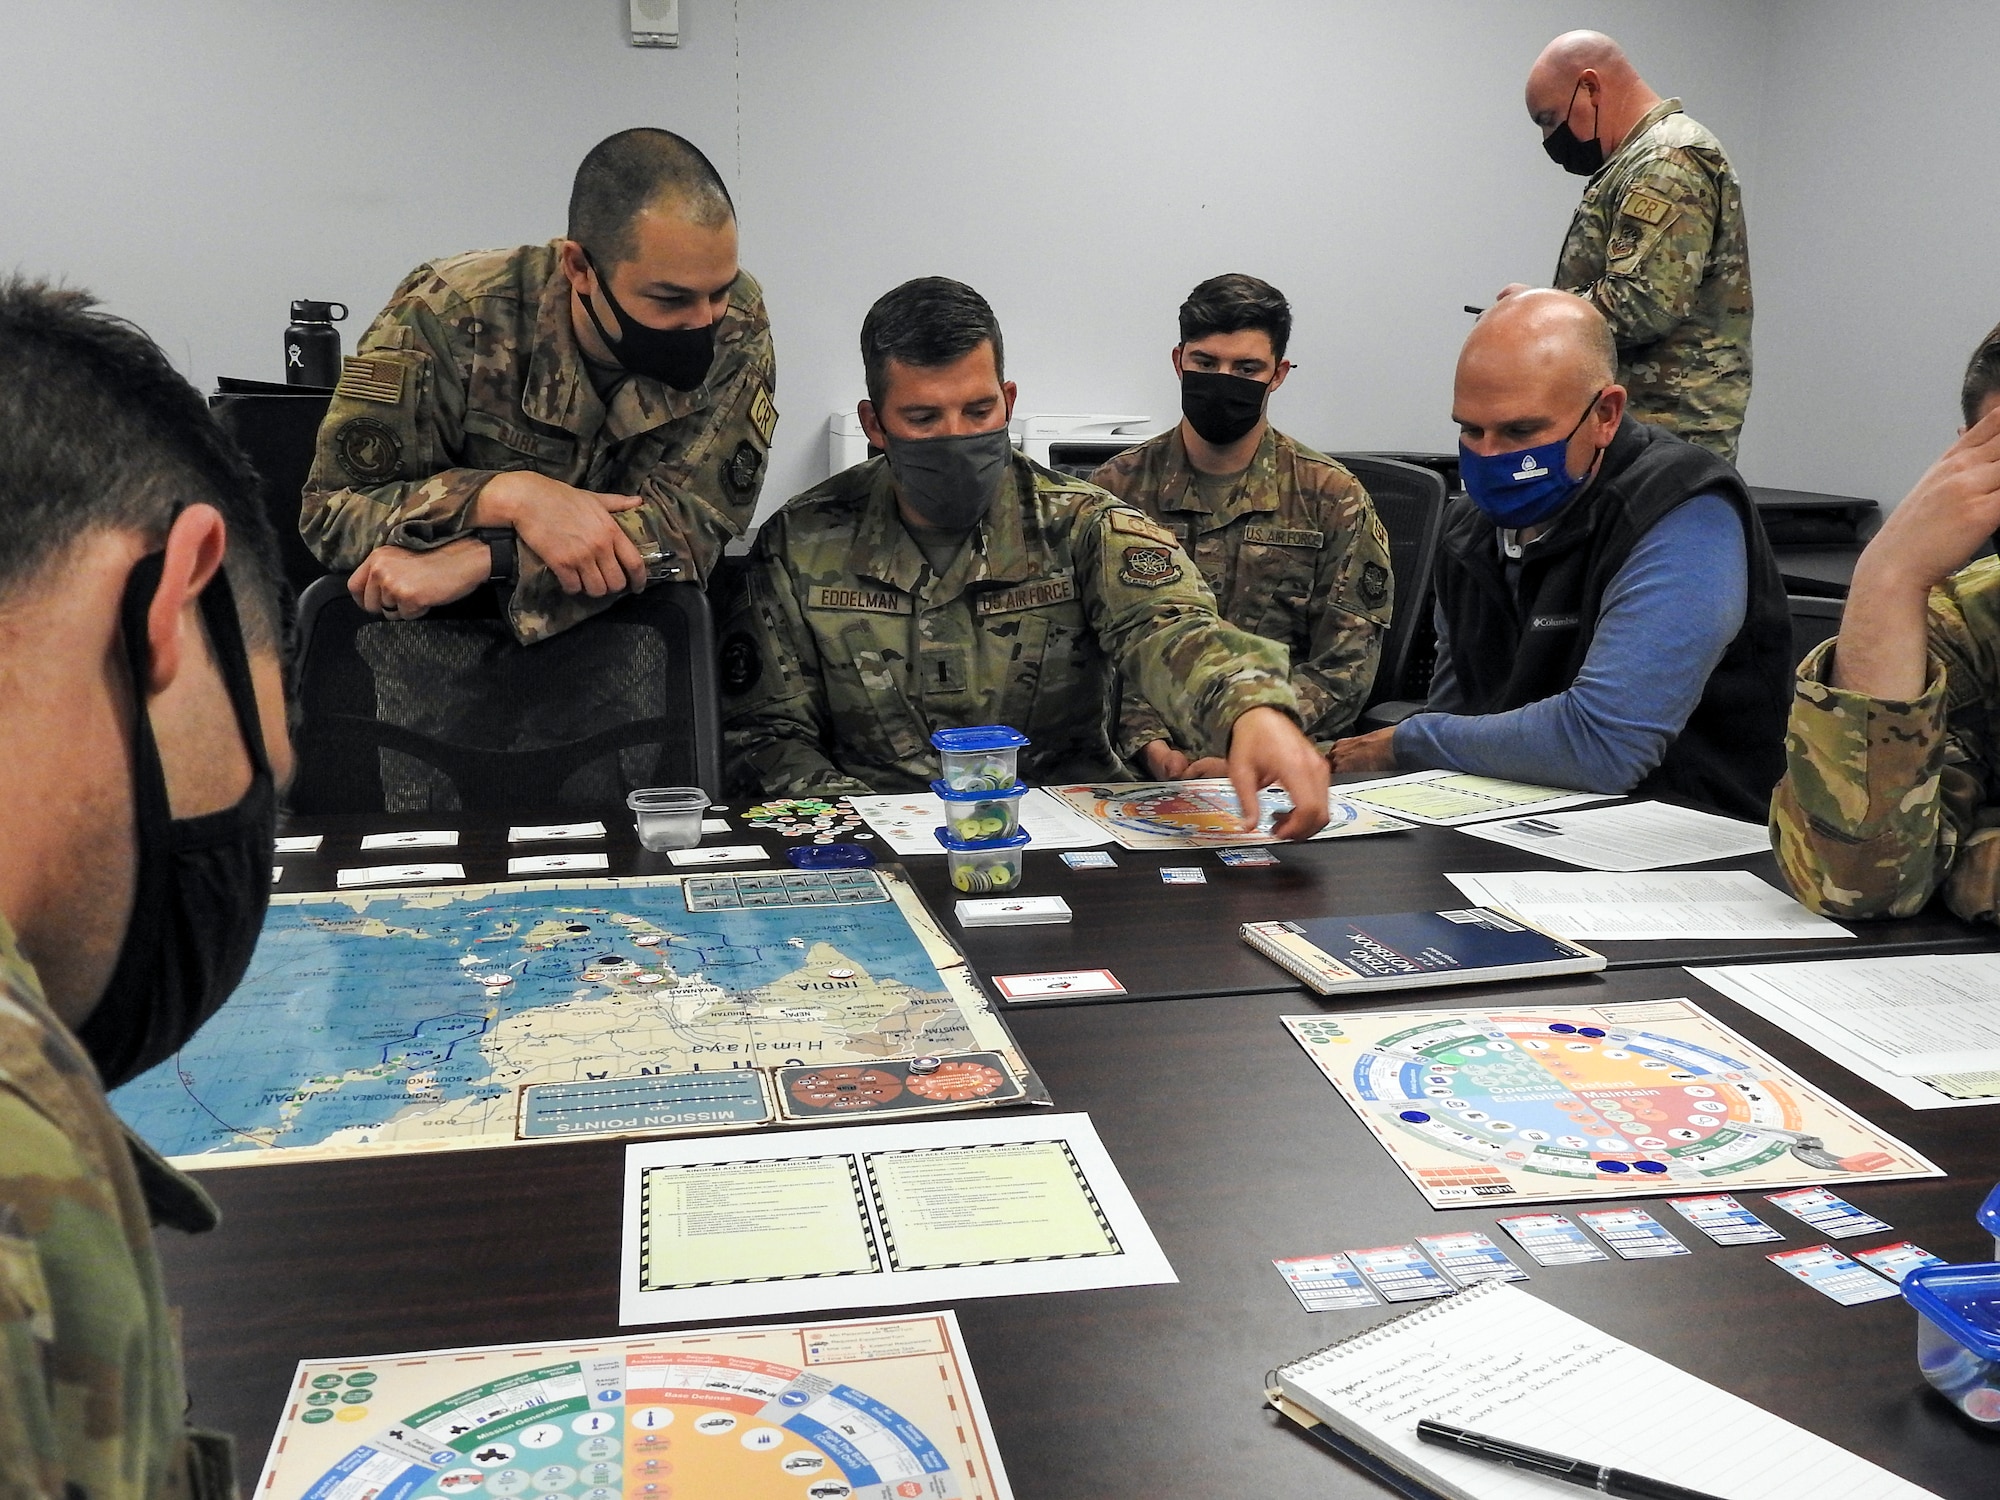 Airmen from various units within the 621st Contingency Response Wing play a prototype military strategy game March 25, 2021, at Travis Air Force Base, California. The game, called “Kingfish ACE” focuses on a hypothetical situation in the Western Pacific and is a strategy game similar to “Risk” and “Dungeons & Dragons.” (U.S. Air Force photo by Senior Airman Chad Kotce)